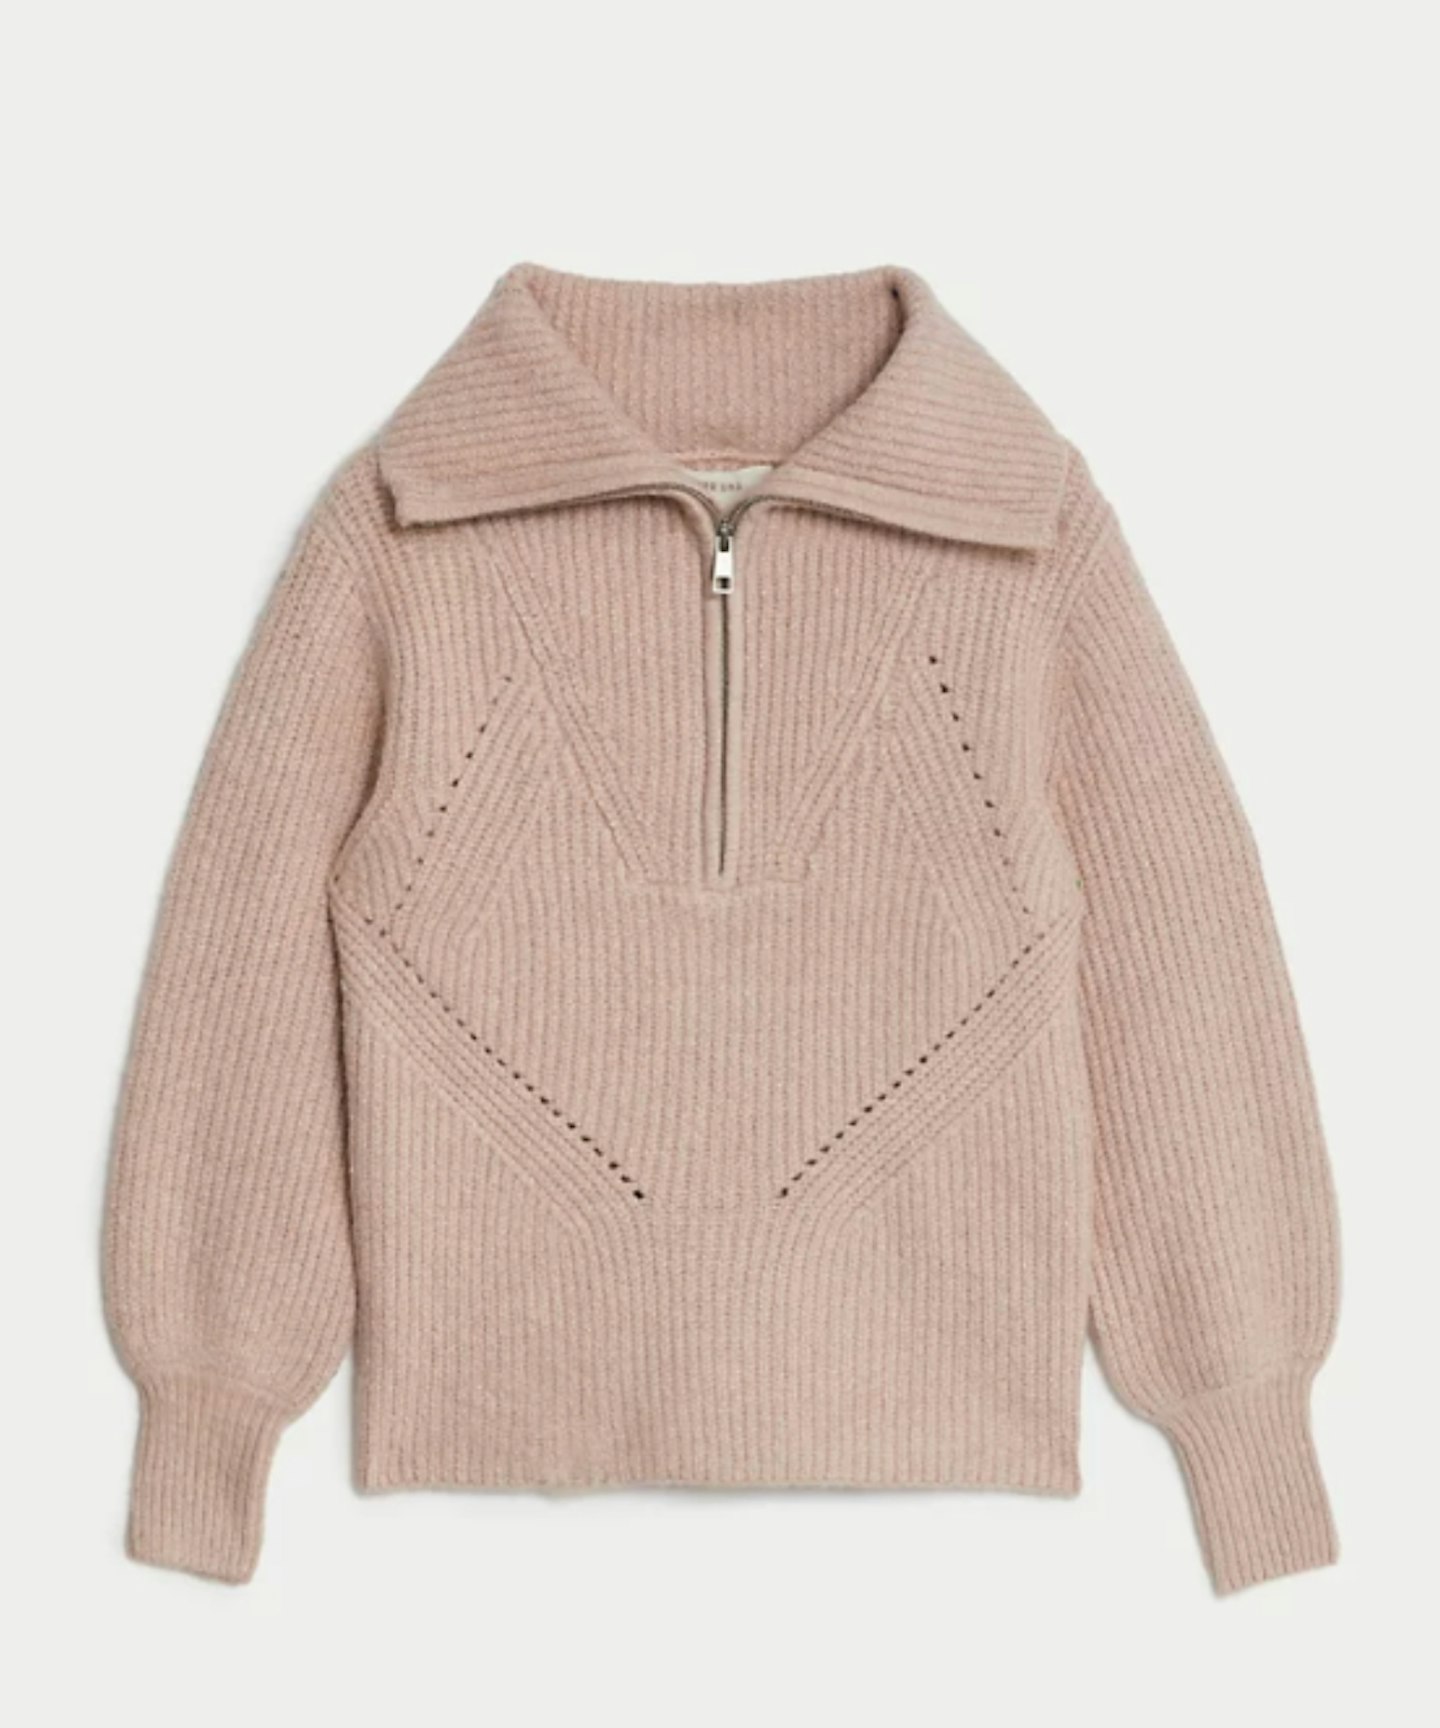 M&S Per Una Cotton Rich Ribbed Jumper with Wool